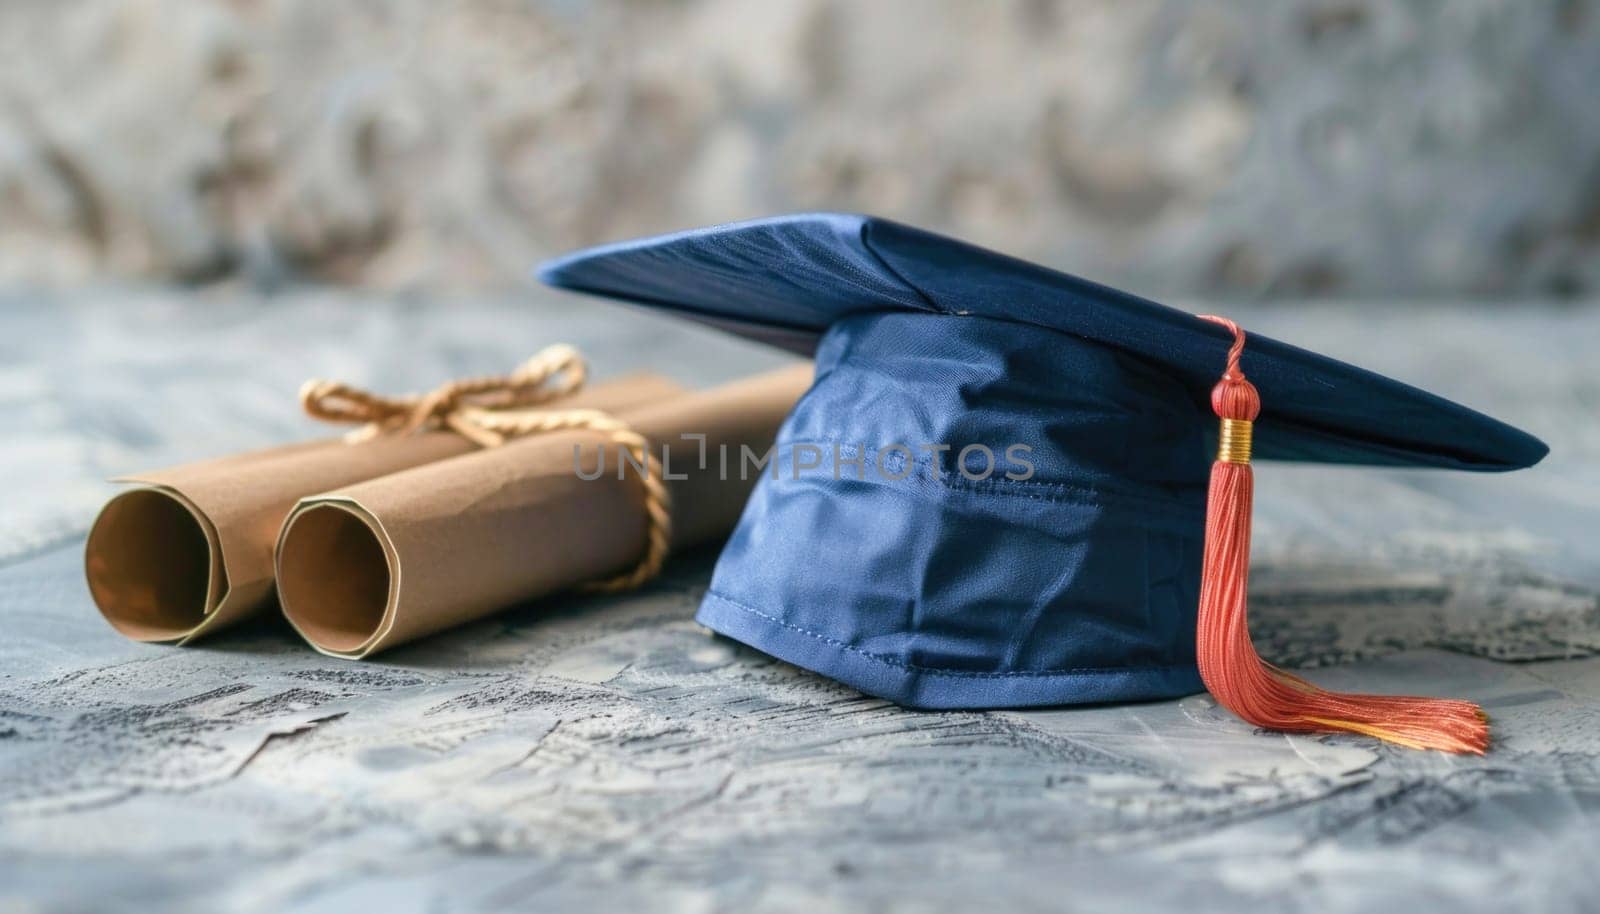 The table is elegantly decorated with a graduation cap and two diplomas, arranged in a formal manner